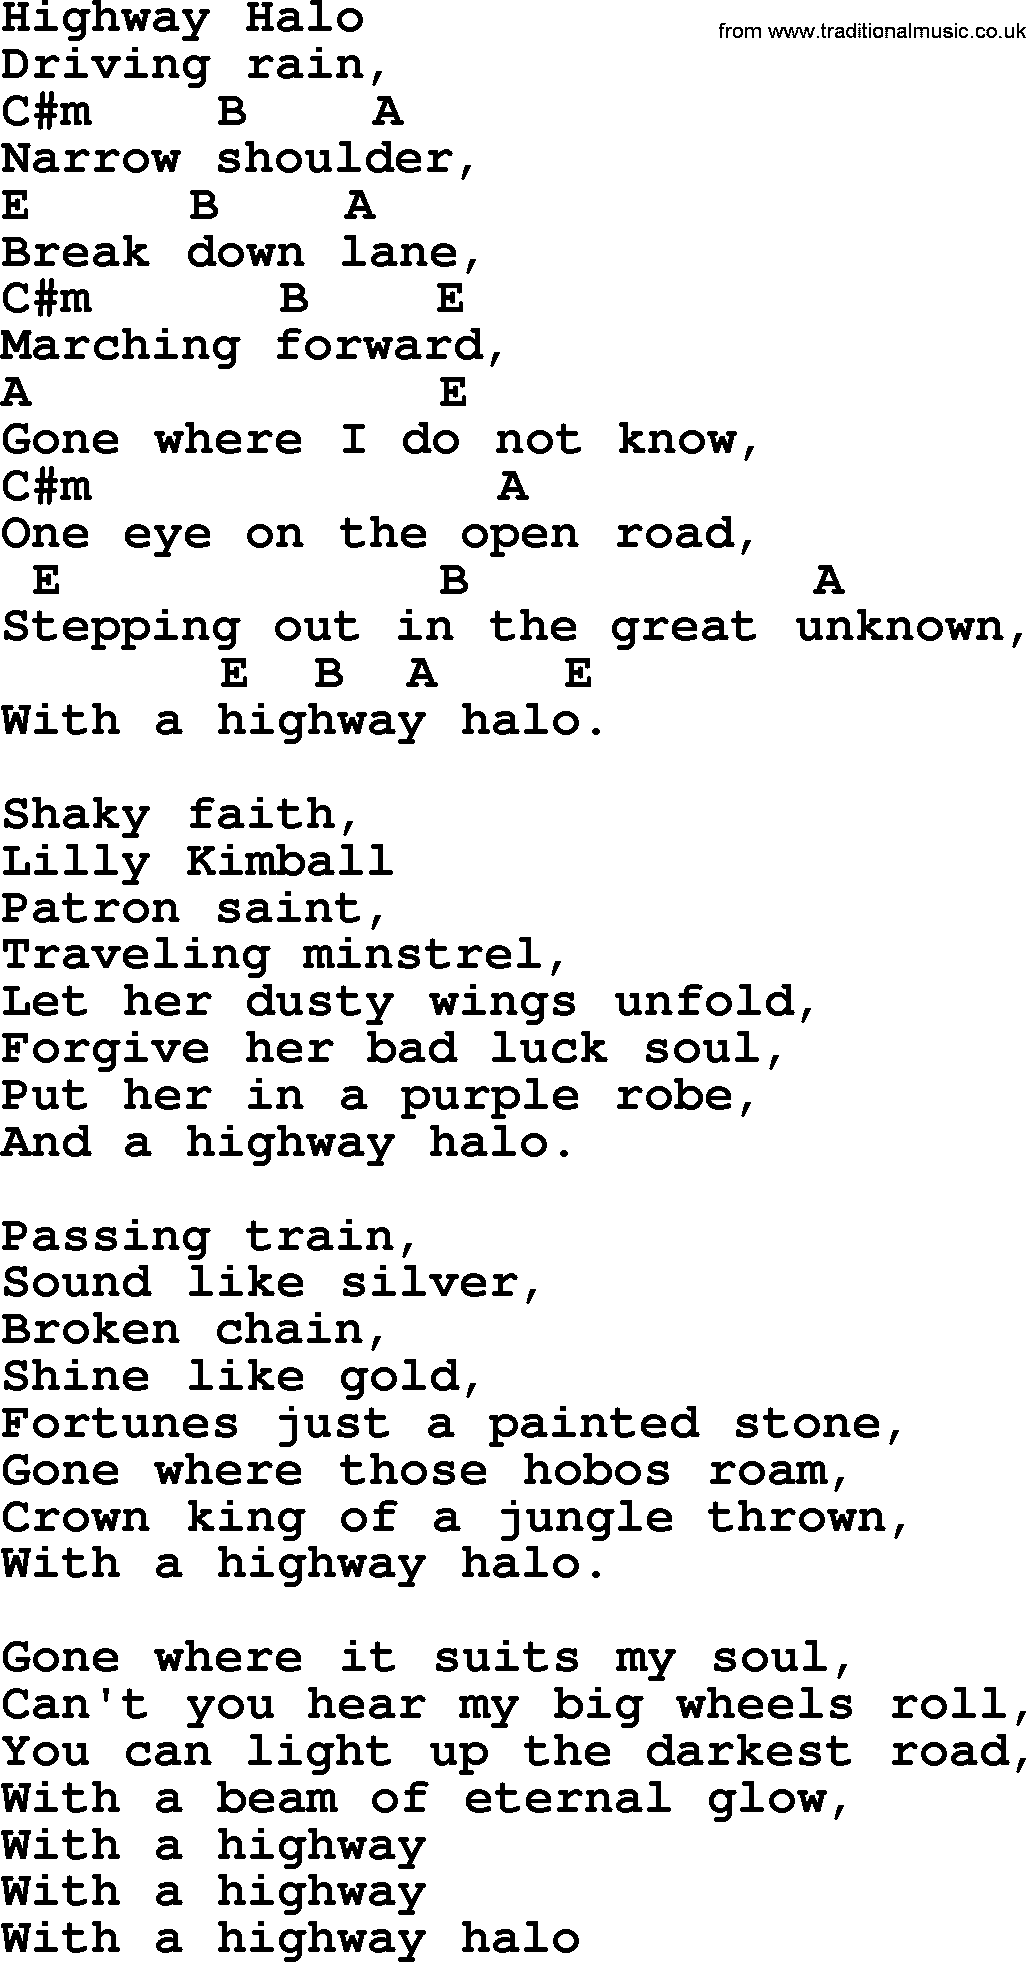 Bluegrass song: Highway Halo, lyrics and chords